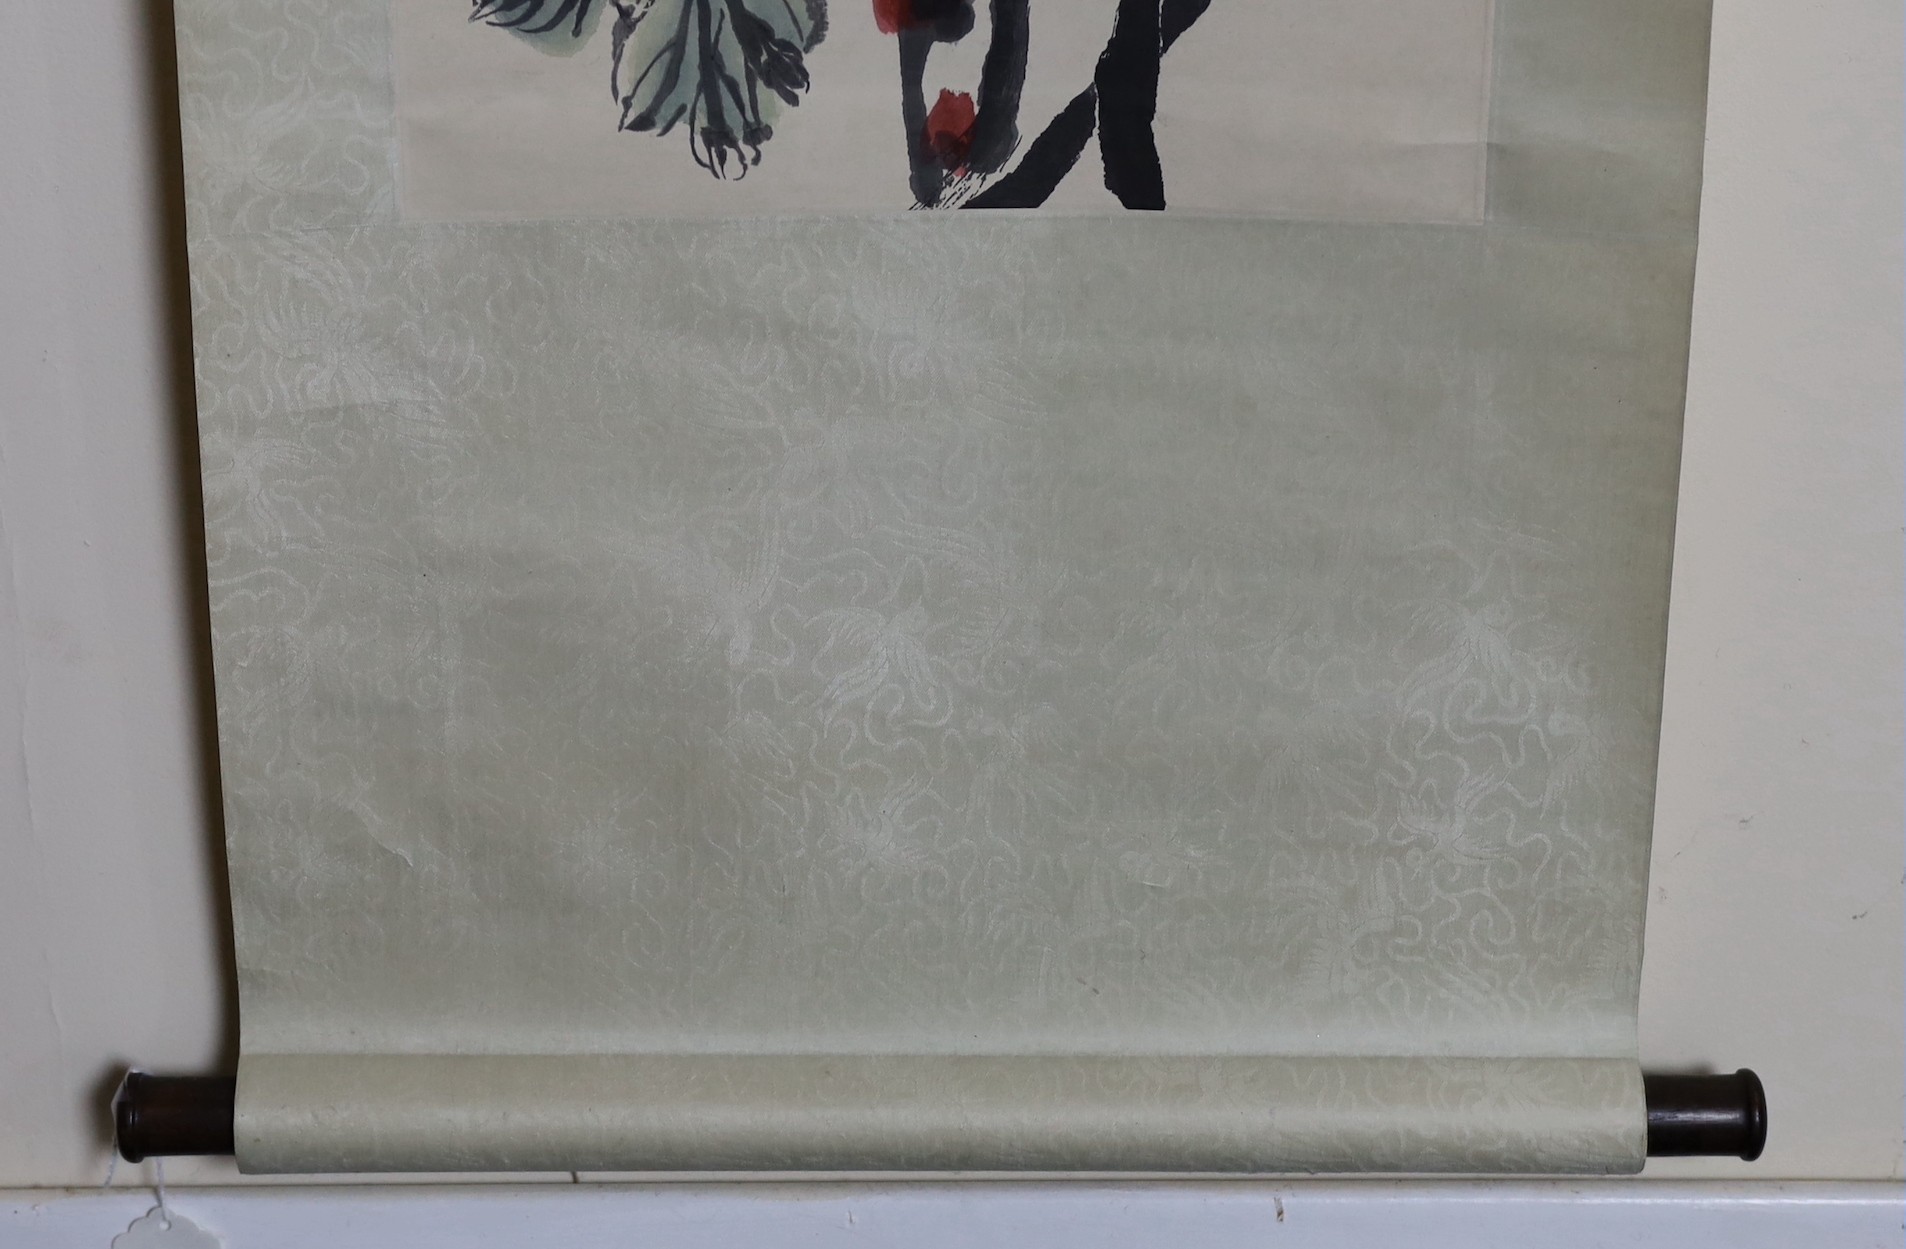 After Qi Baishi (1863-1957), Ribbon peonies, printed scroll, published by Tianjin Arts & Crafts Export Company, 1959, image 104cm x 33cm